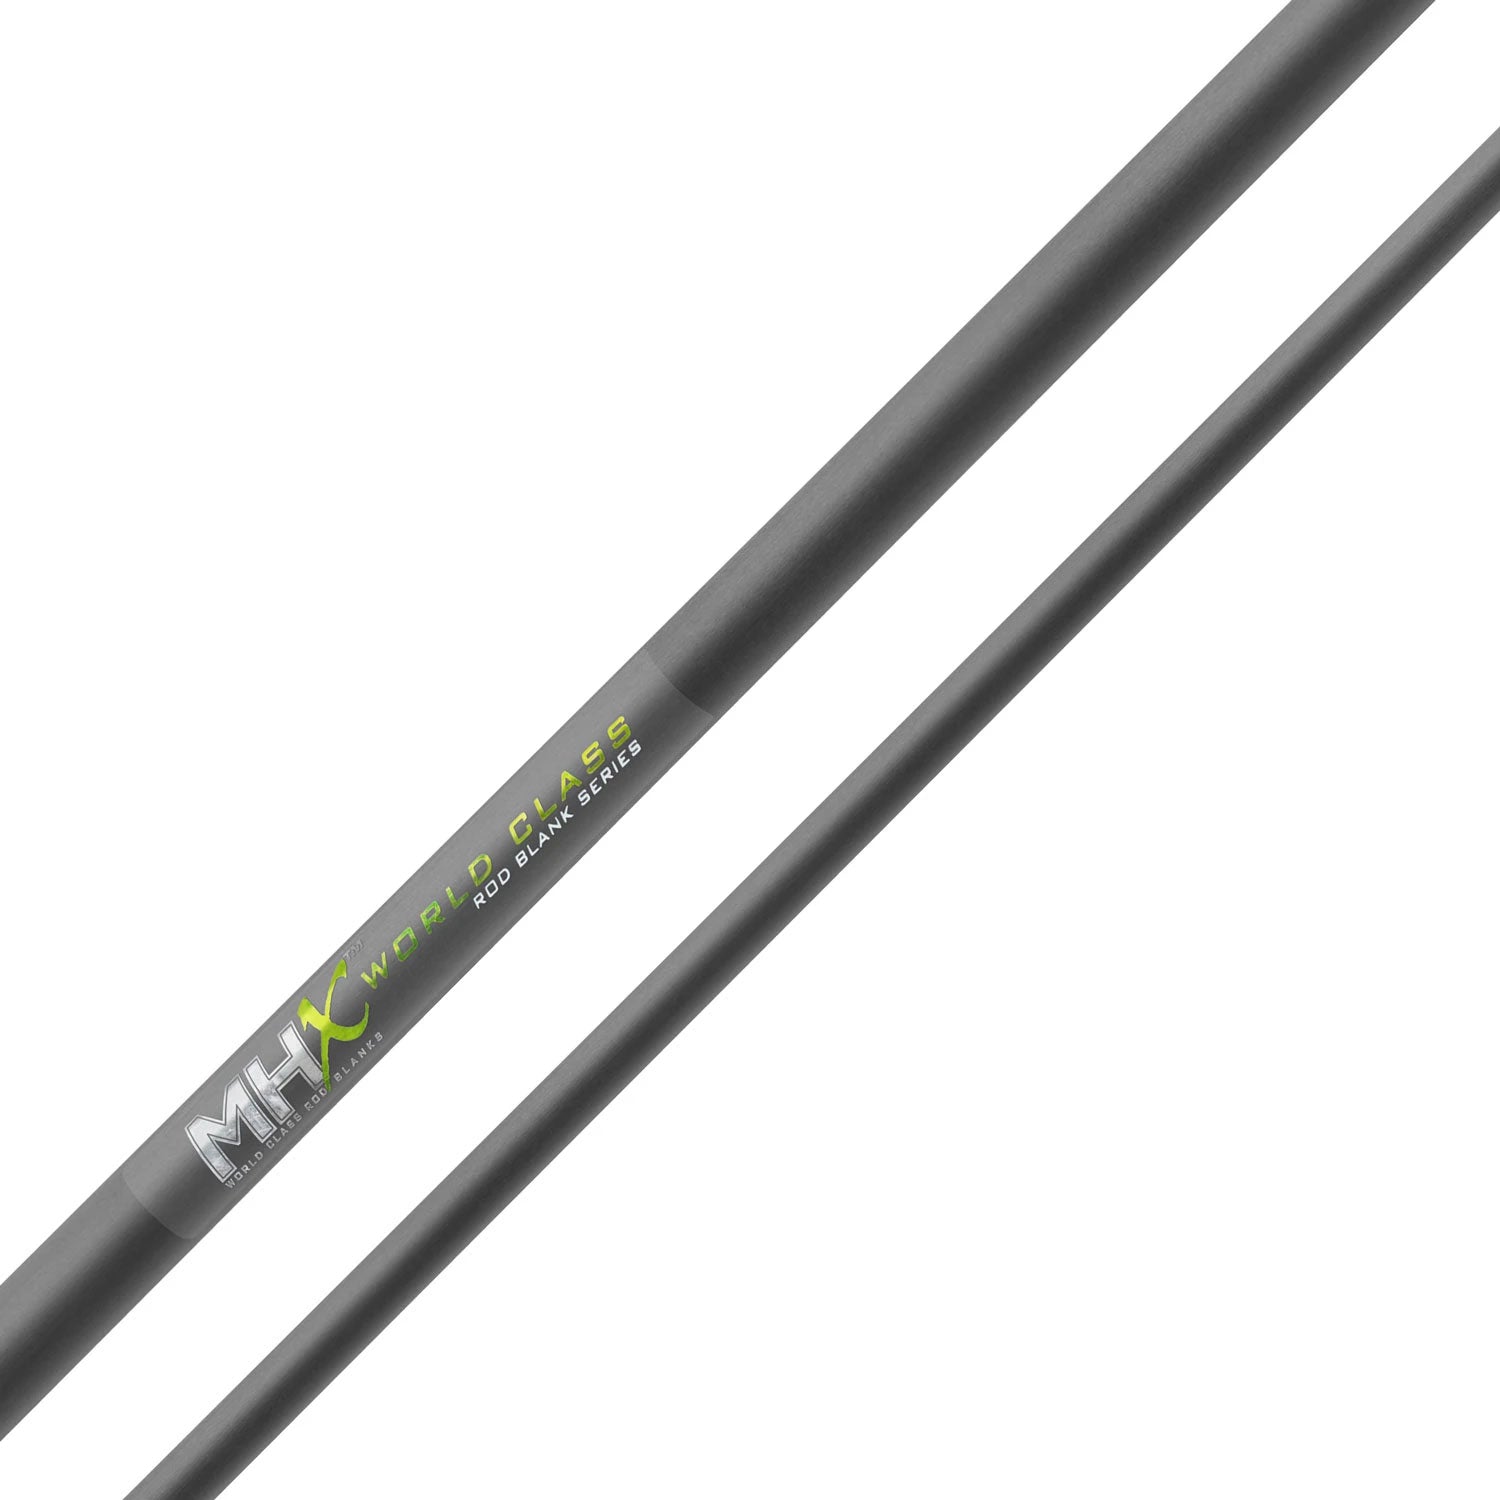 CRB 9'0 Med-Heavy Graphite Surf & Inlet Rod Blank - ISSW1088